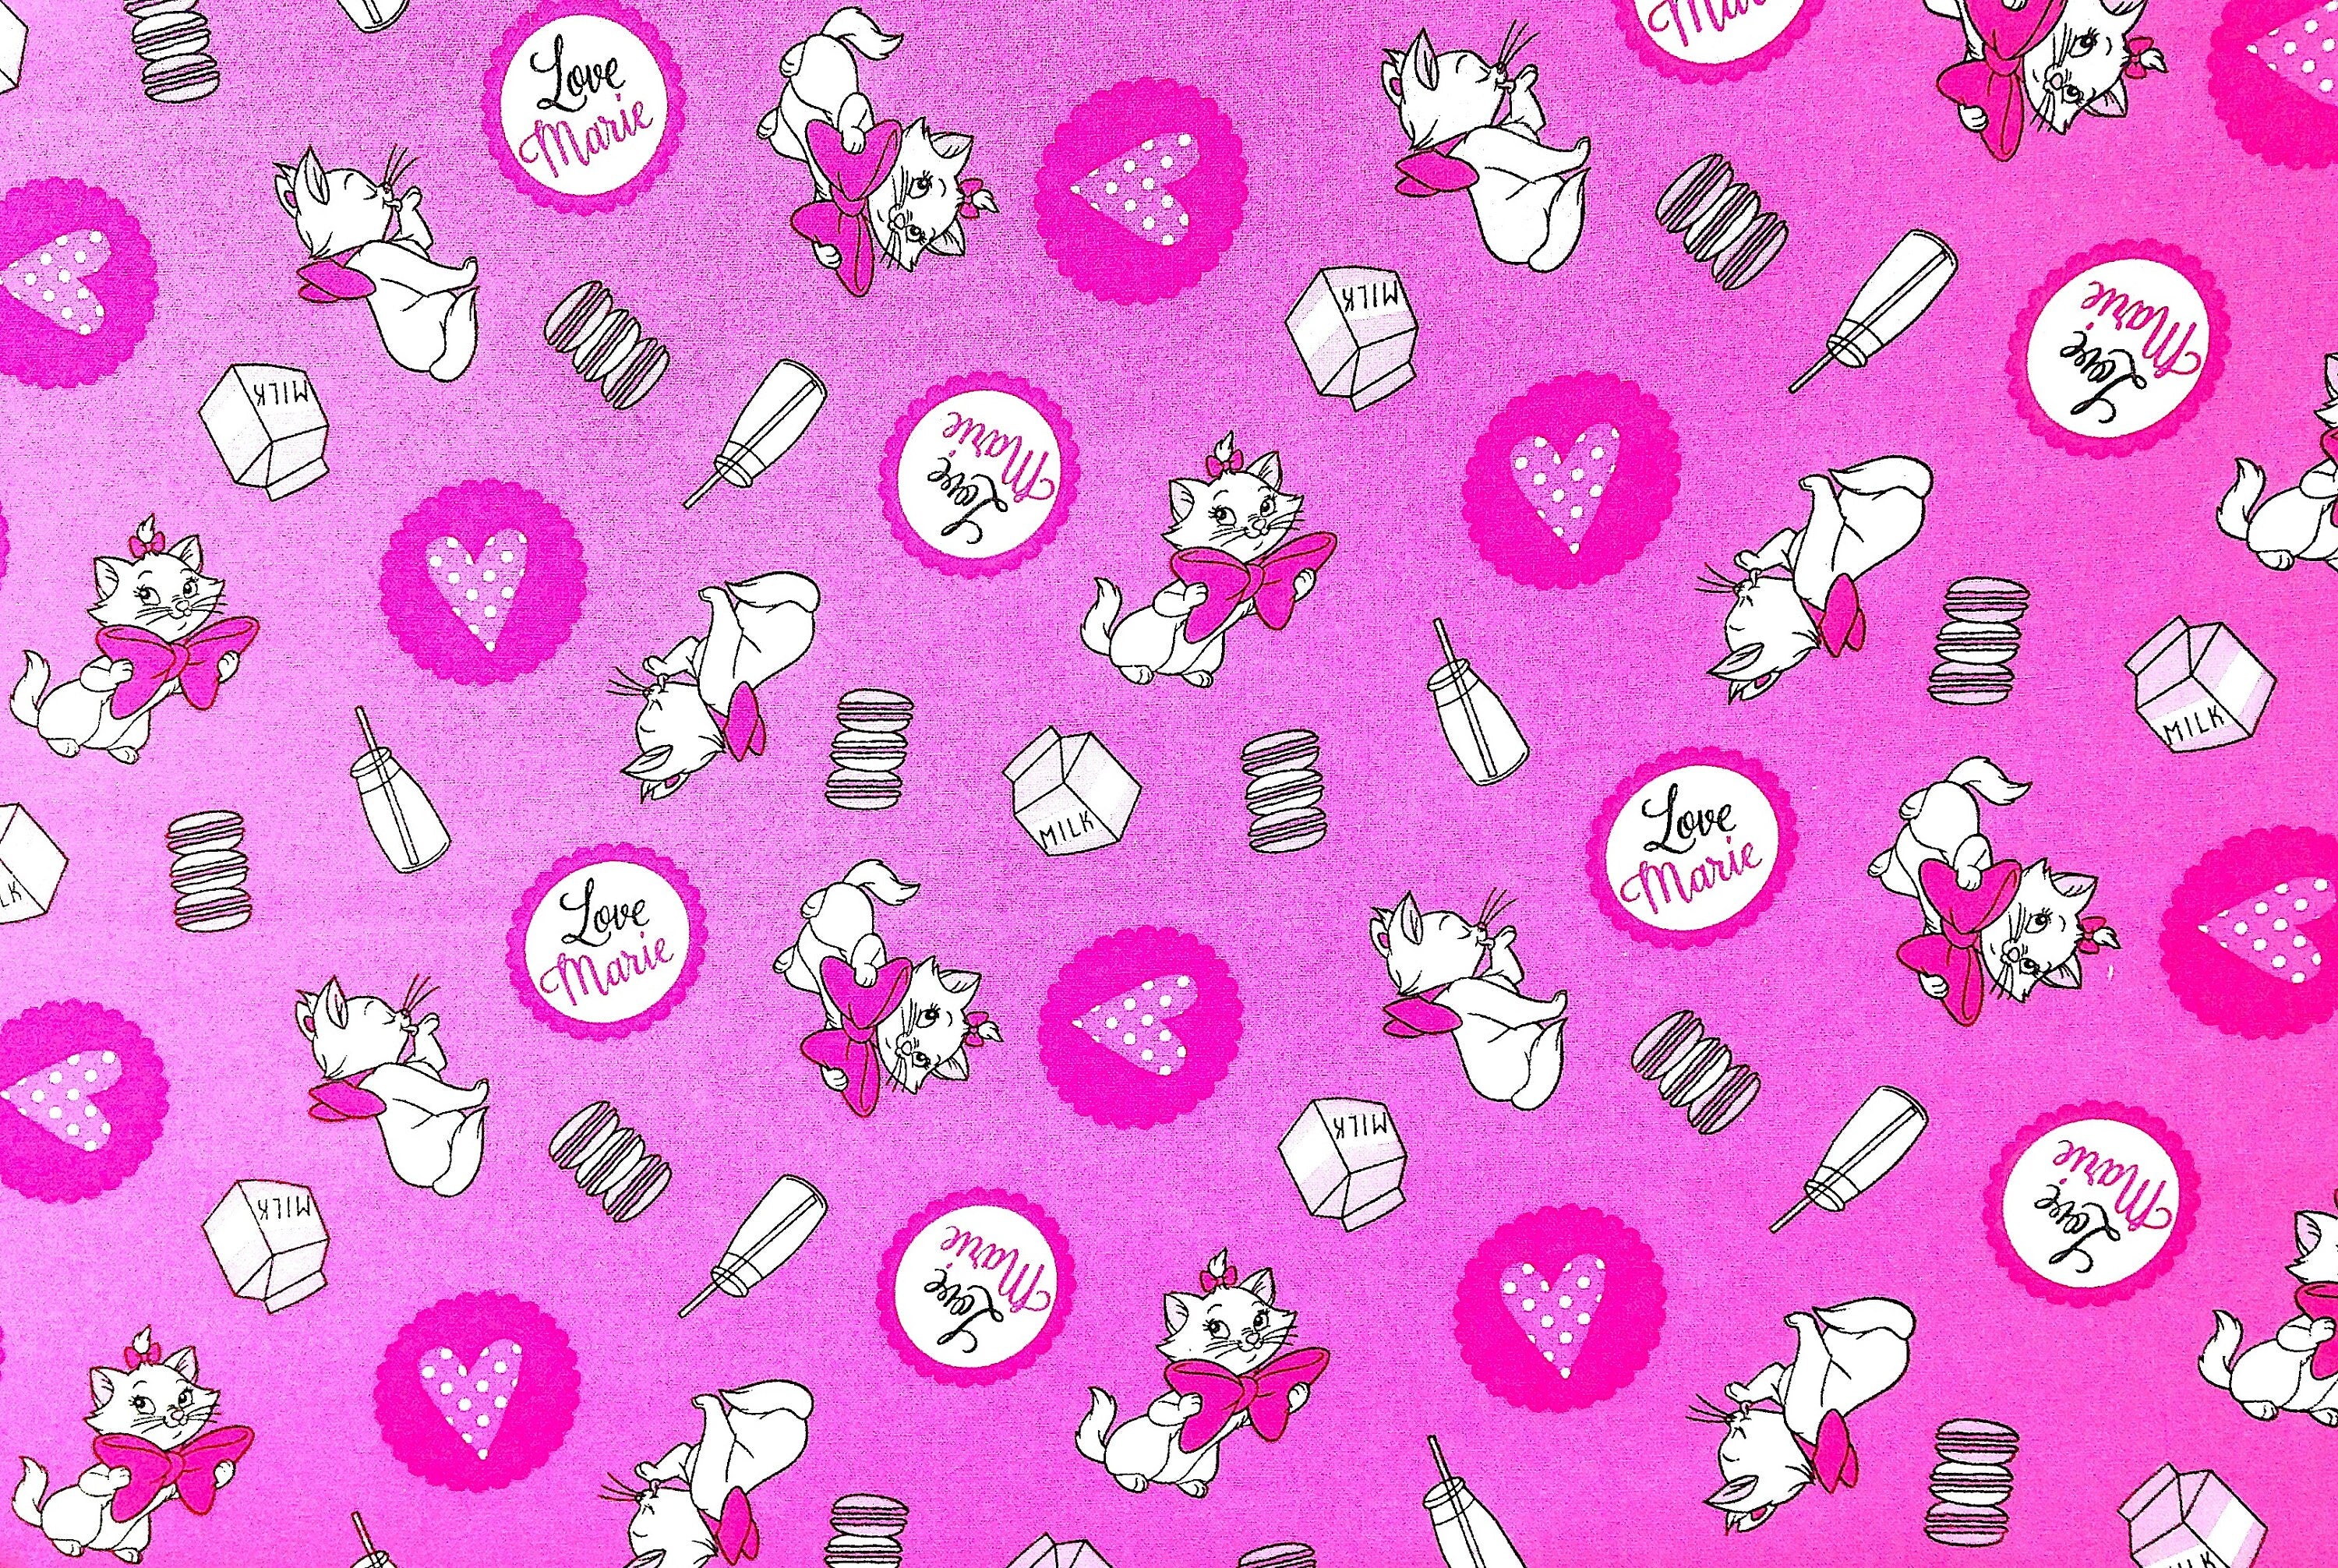 This Disney fabric features Marie the cat who loves milk